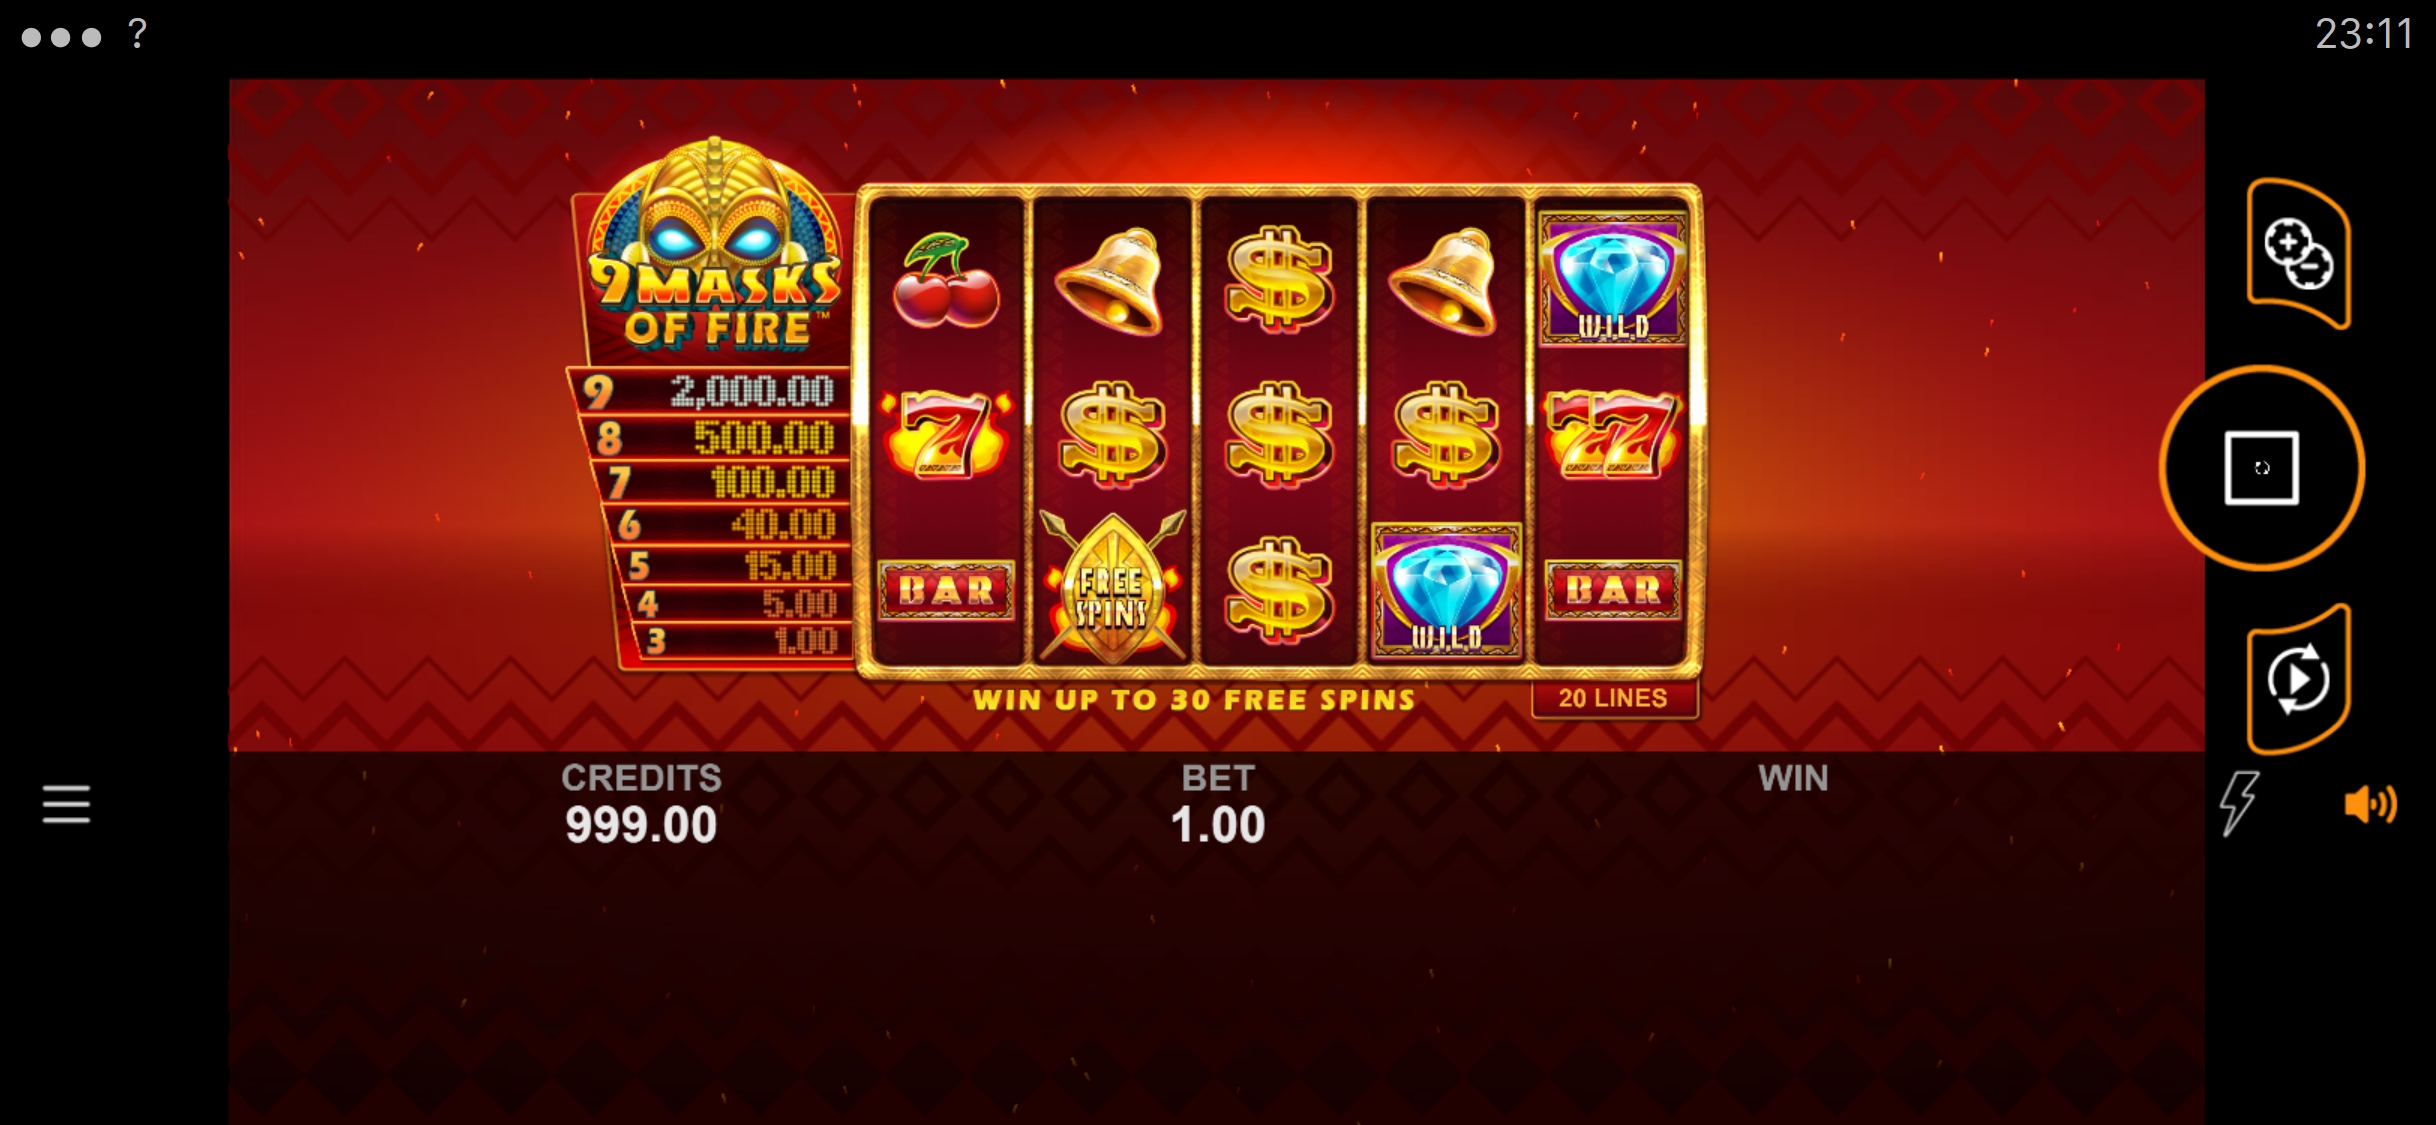 BetsPalace Casino Mobile Slot Games Review